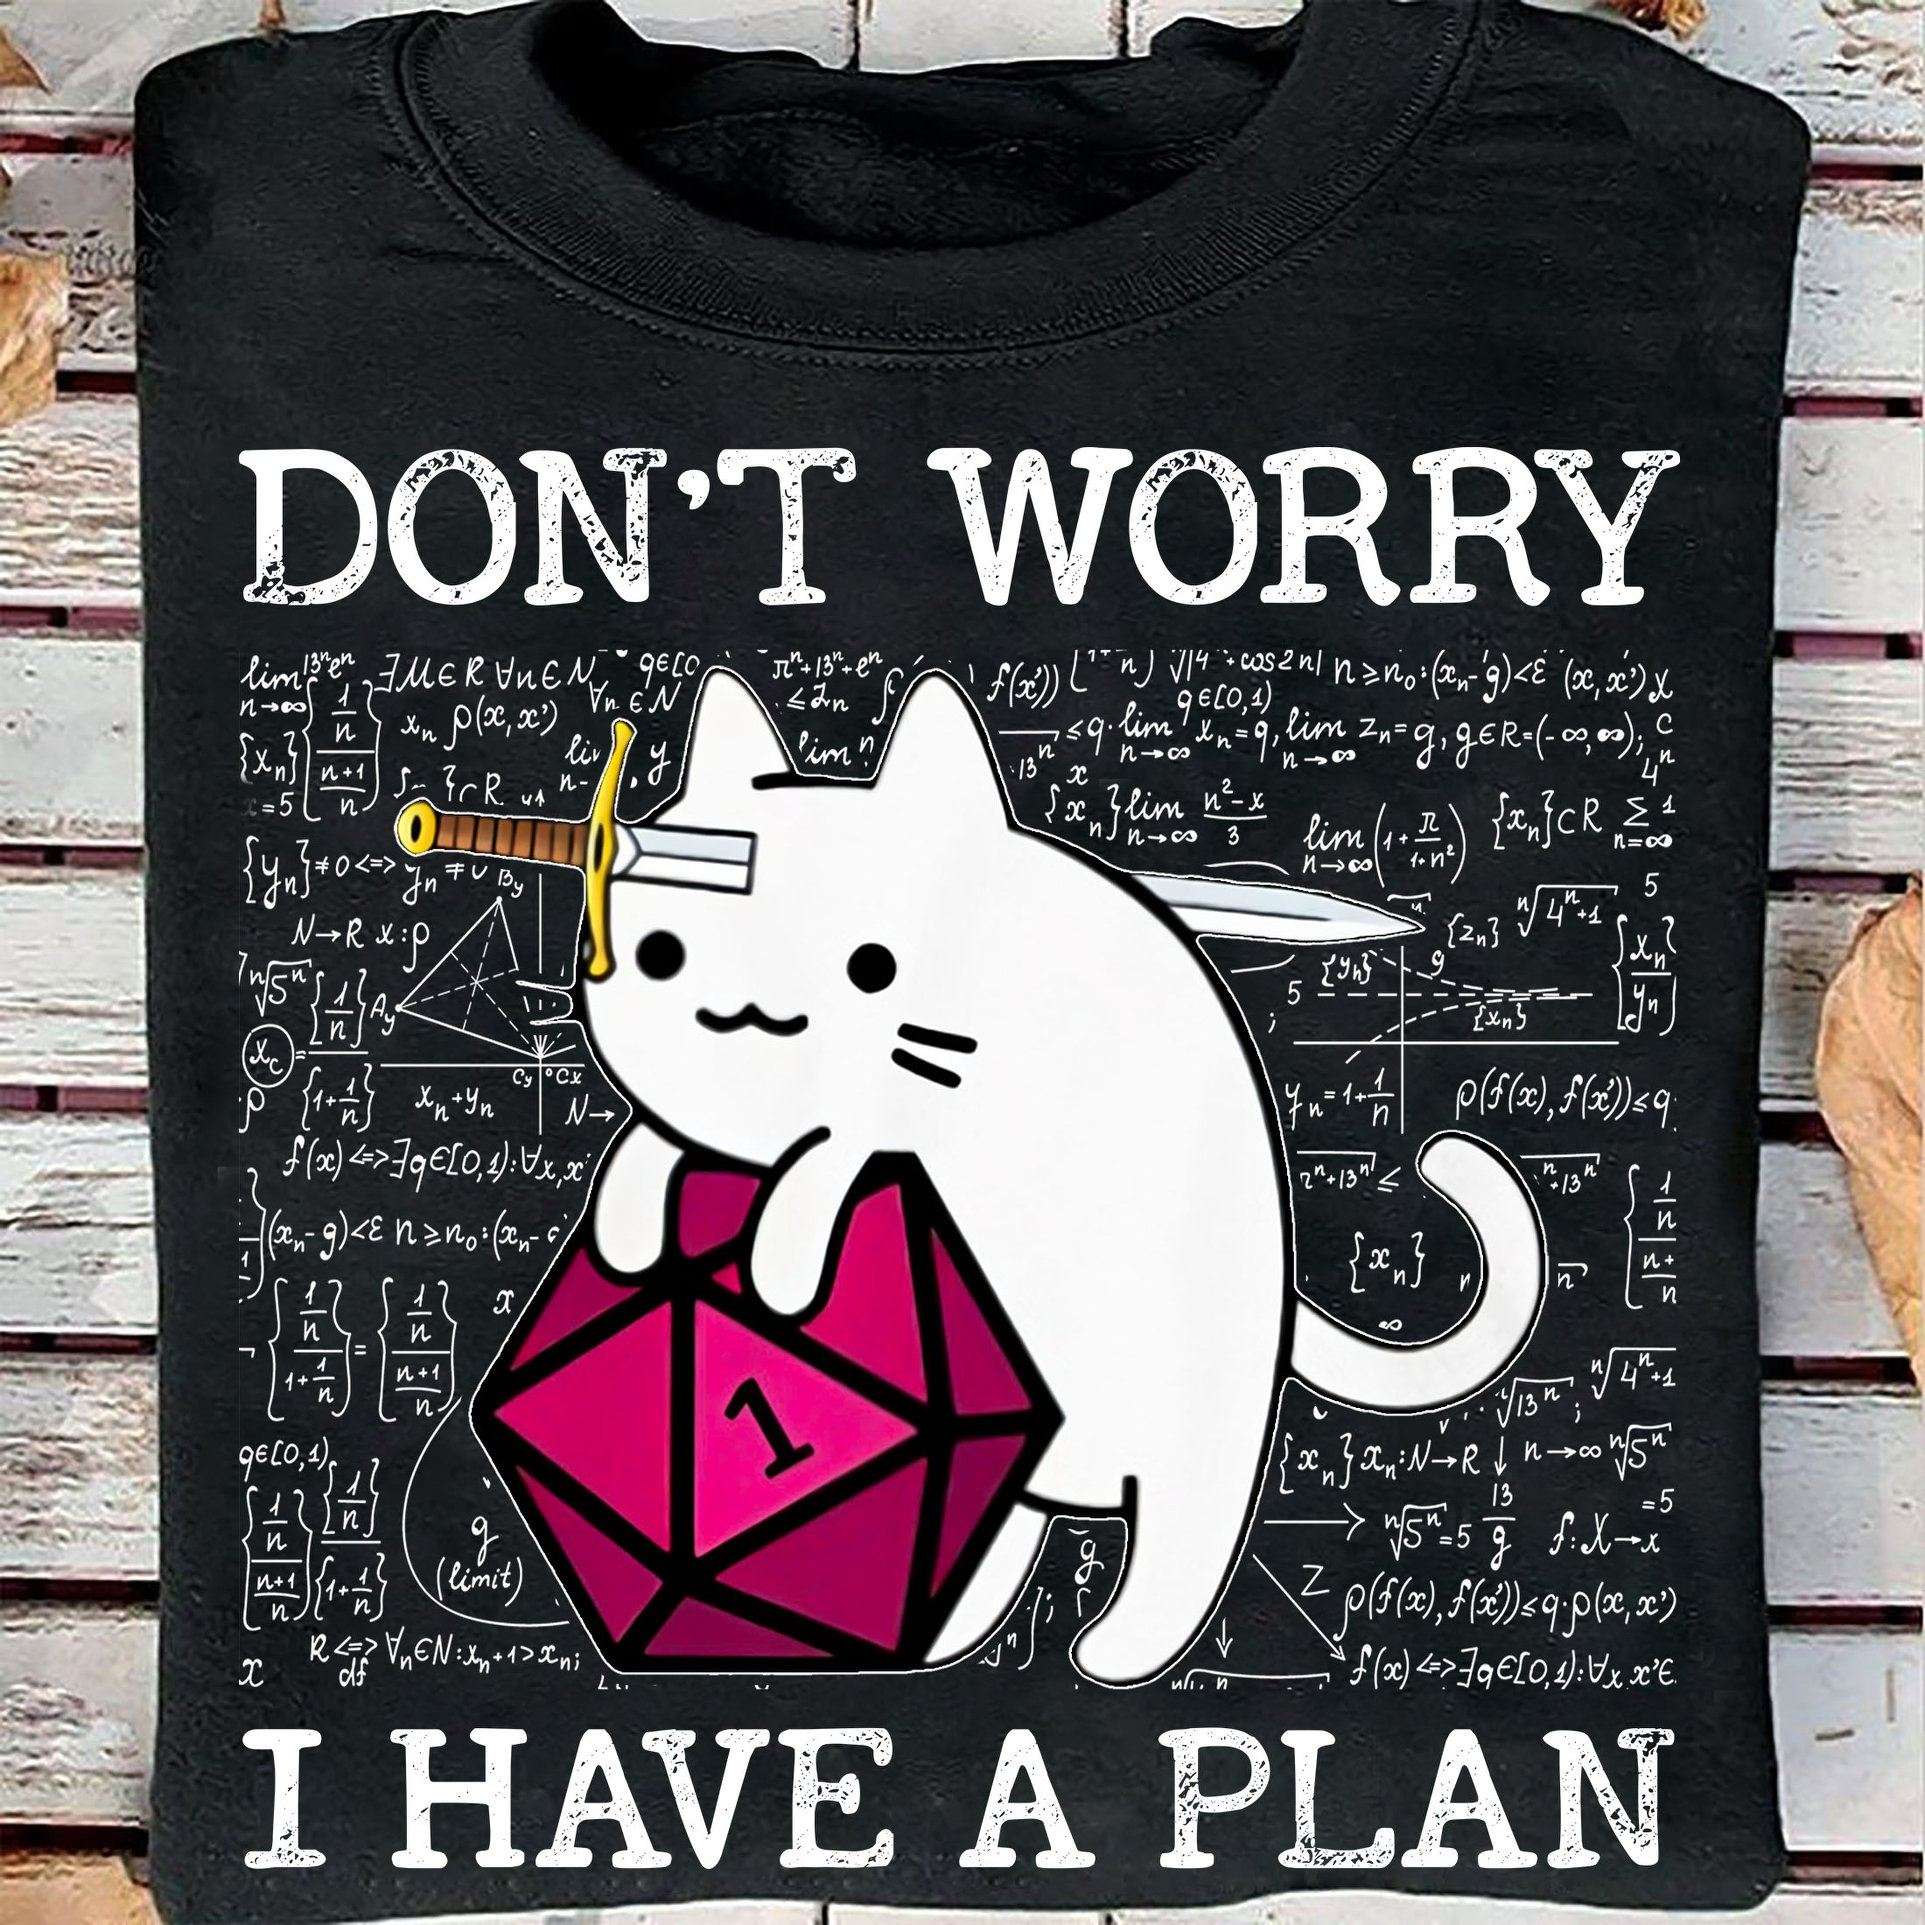 Don't worry I have a plan - D&d game, cat rolling dice